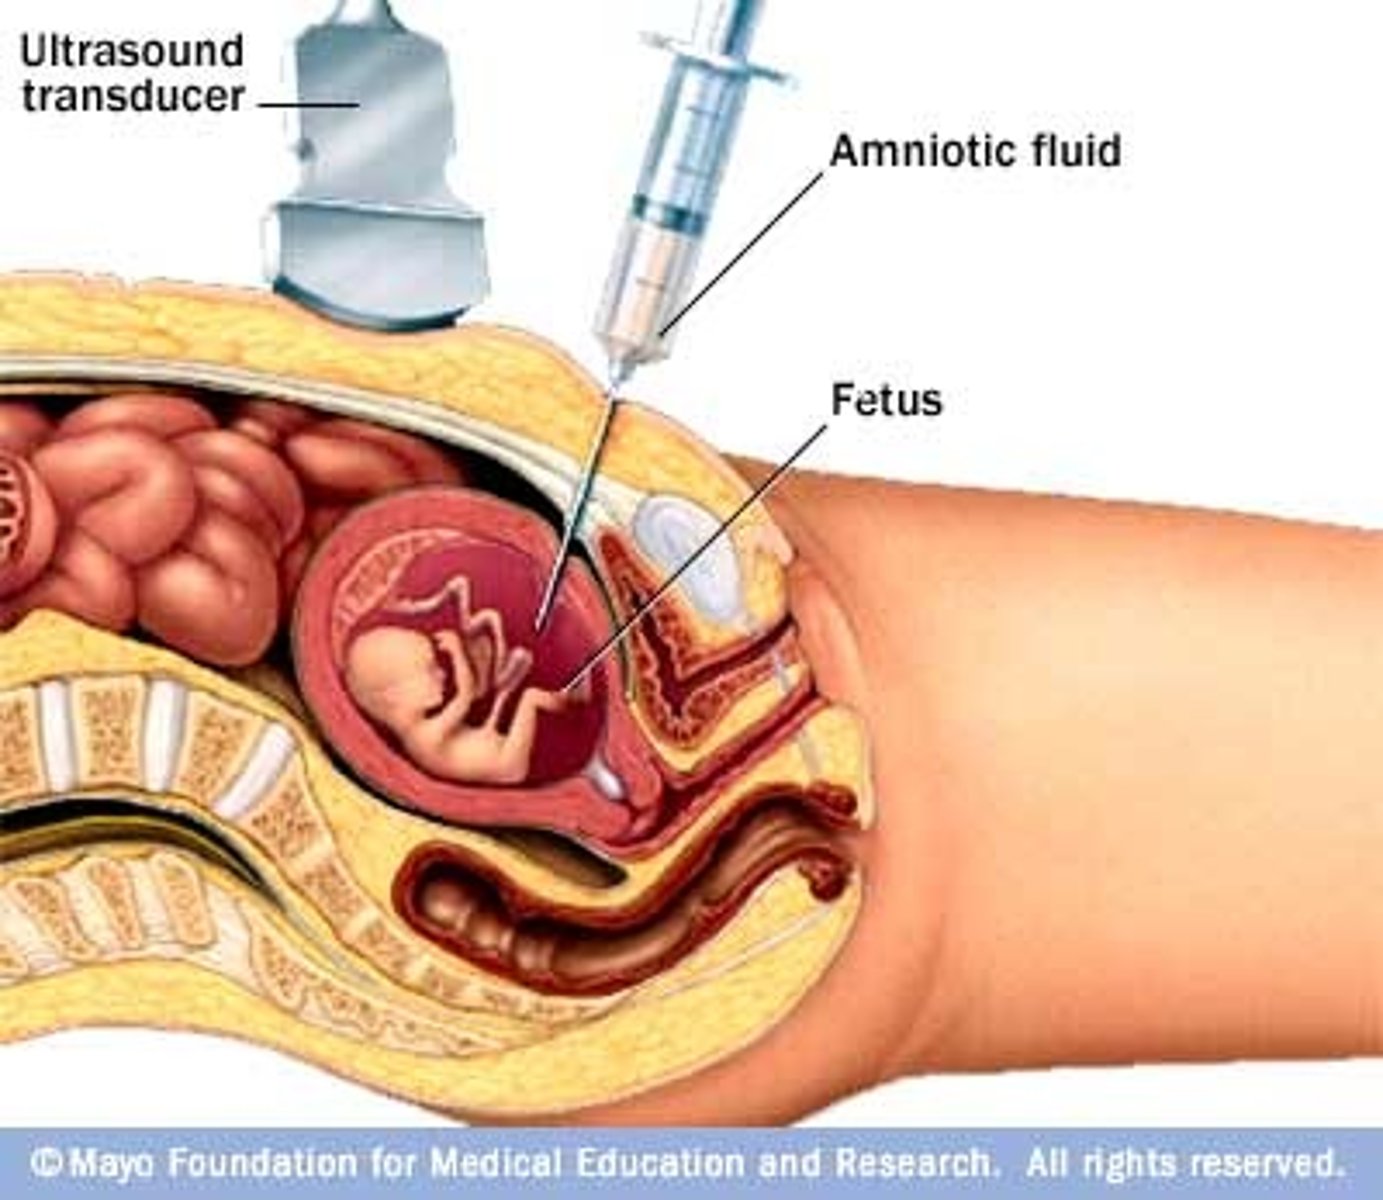 <p>a procedure used to diagnose genetic defects in the early stages of pregnancy; it involves collecting amniotic fluid using a needle and syringe.</p>